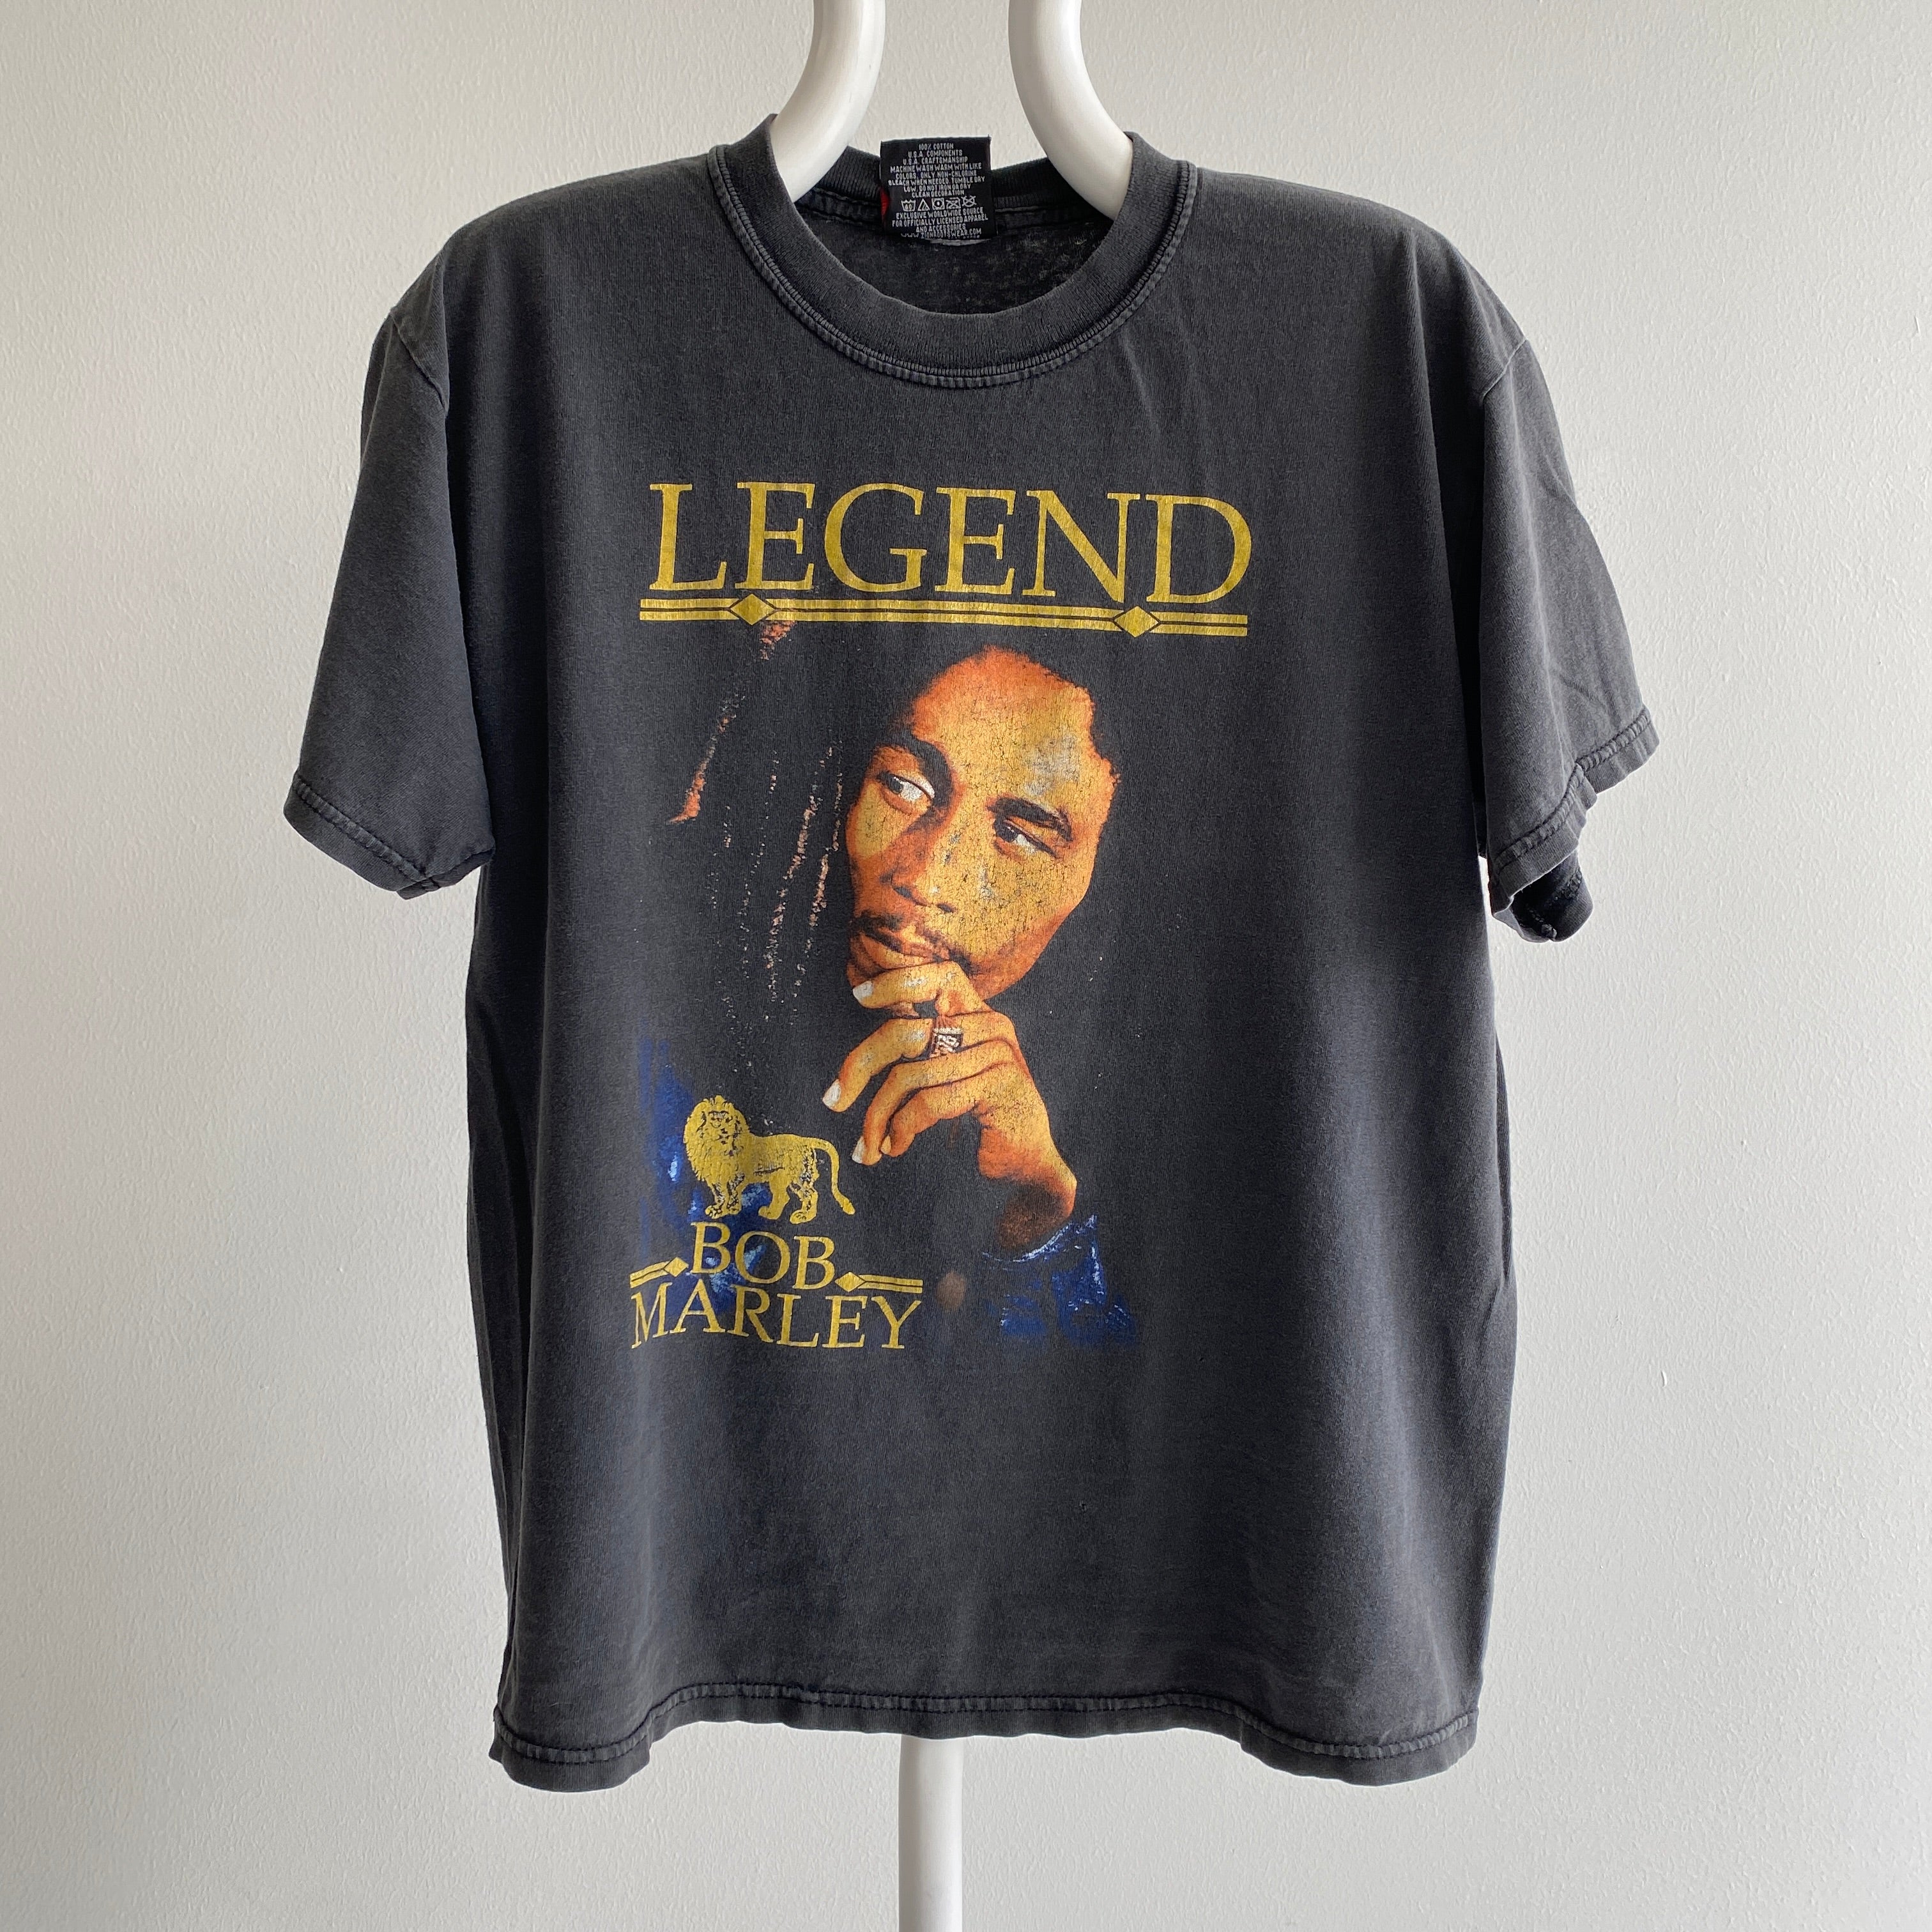 2000s (EARLY) Bob Marley Faded and Worn T-Shirt